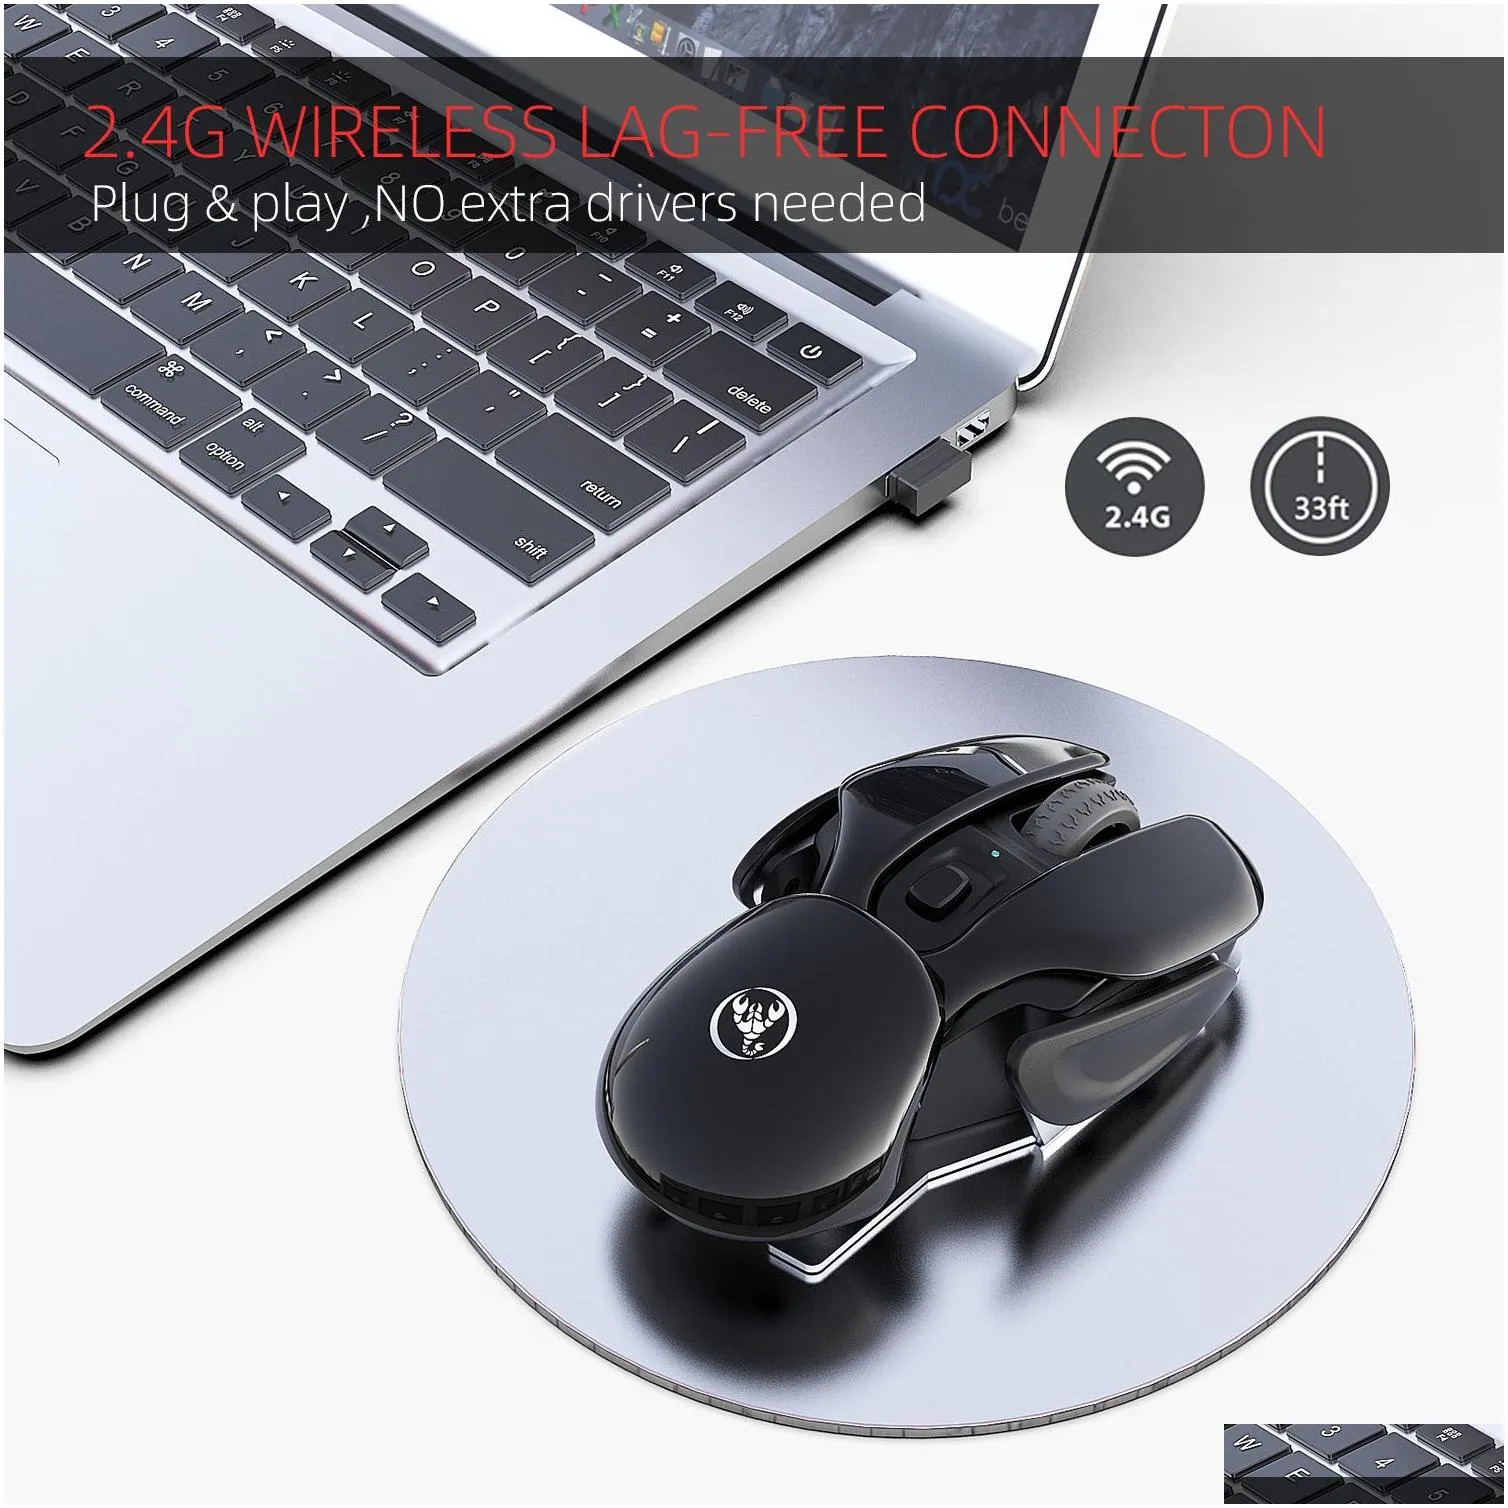 Mice Mice Rechargeable Wireless Mouse Silent Click Design USB for Laptop Notebook Desktop 1600dpi Adjustable 230210